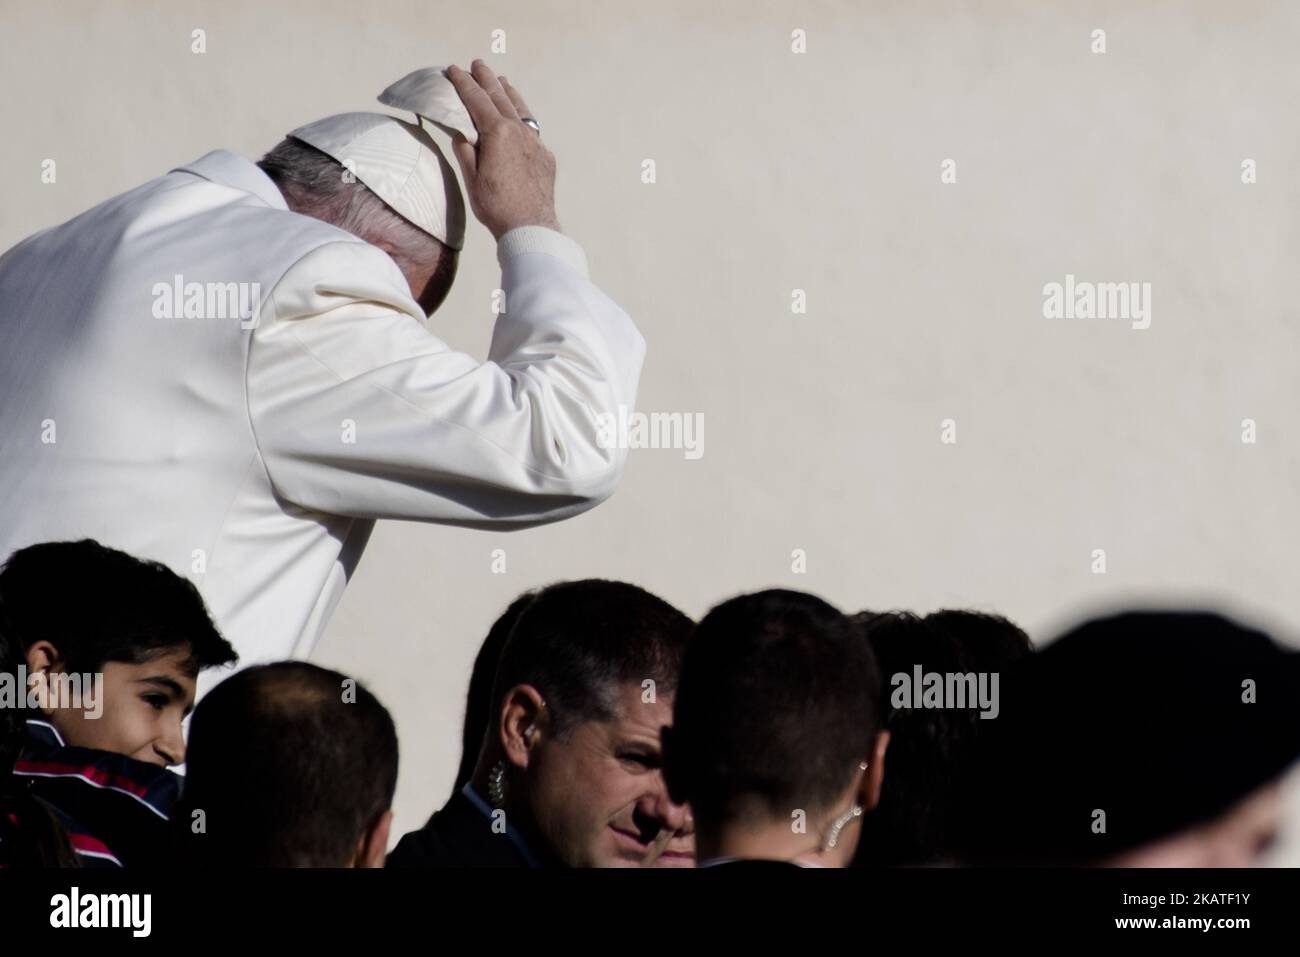 Pope Francis changes his zucchetto (skullcap) as he leaves St. Peter's Square in Vatican city for his weekly general audience, Wednesday, Nov. 22, 2017. (Photo by Massimo Valicchia/NurPhoto) Stock Photo